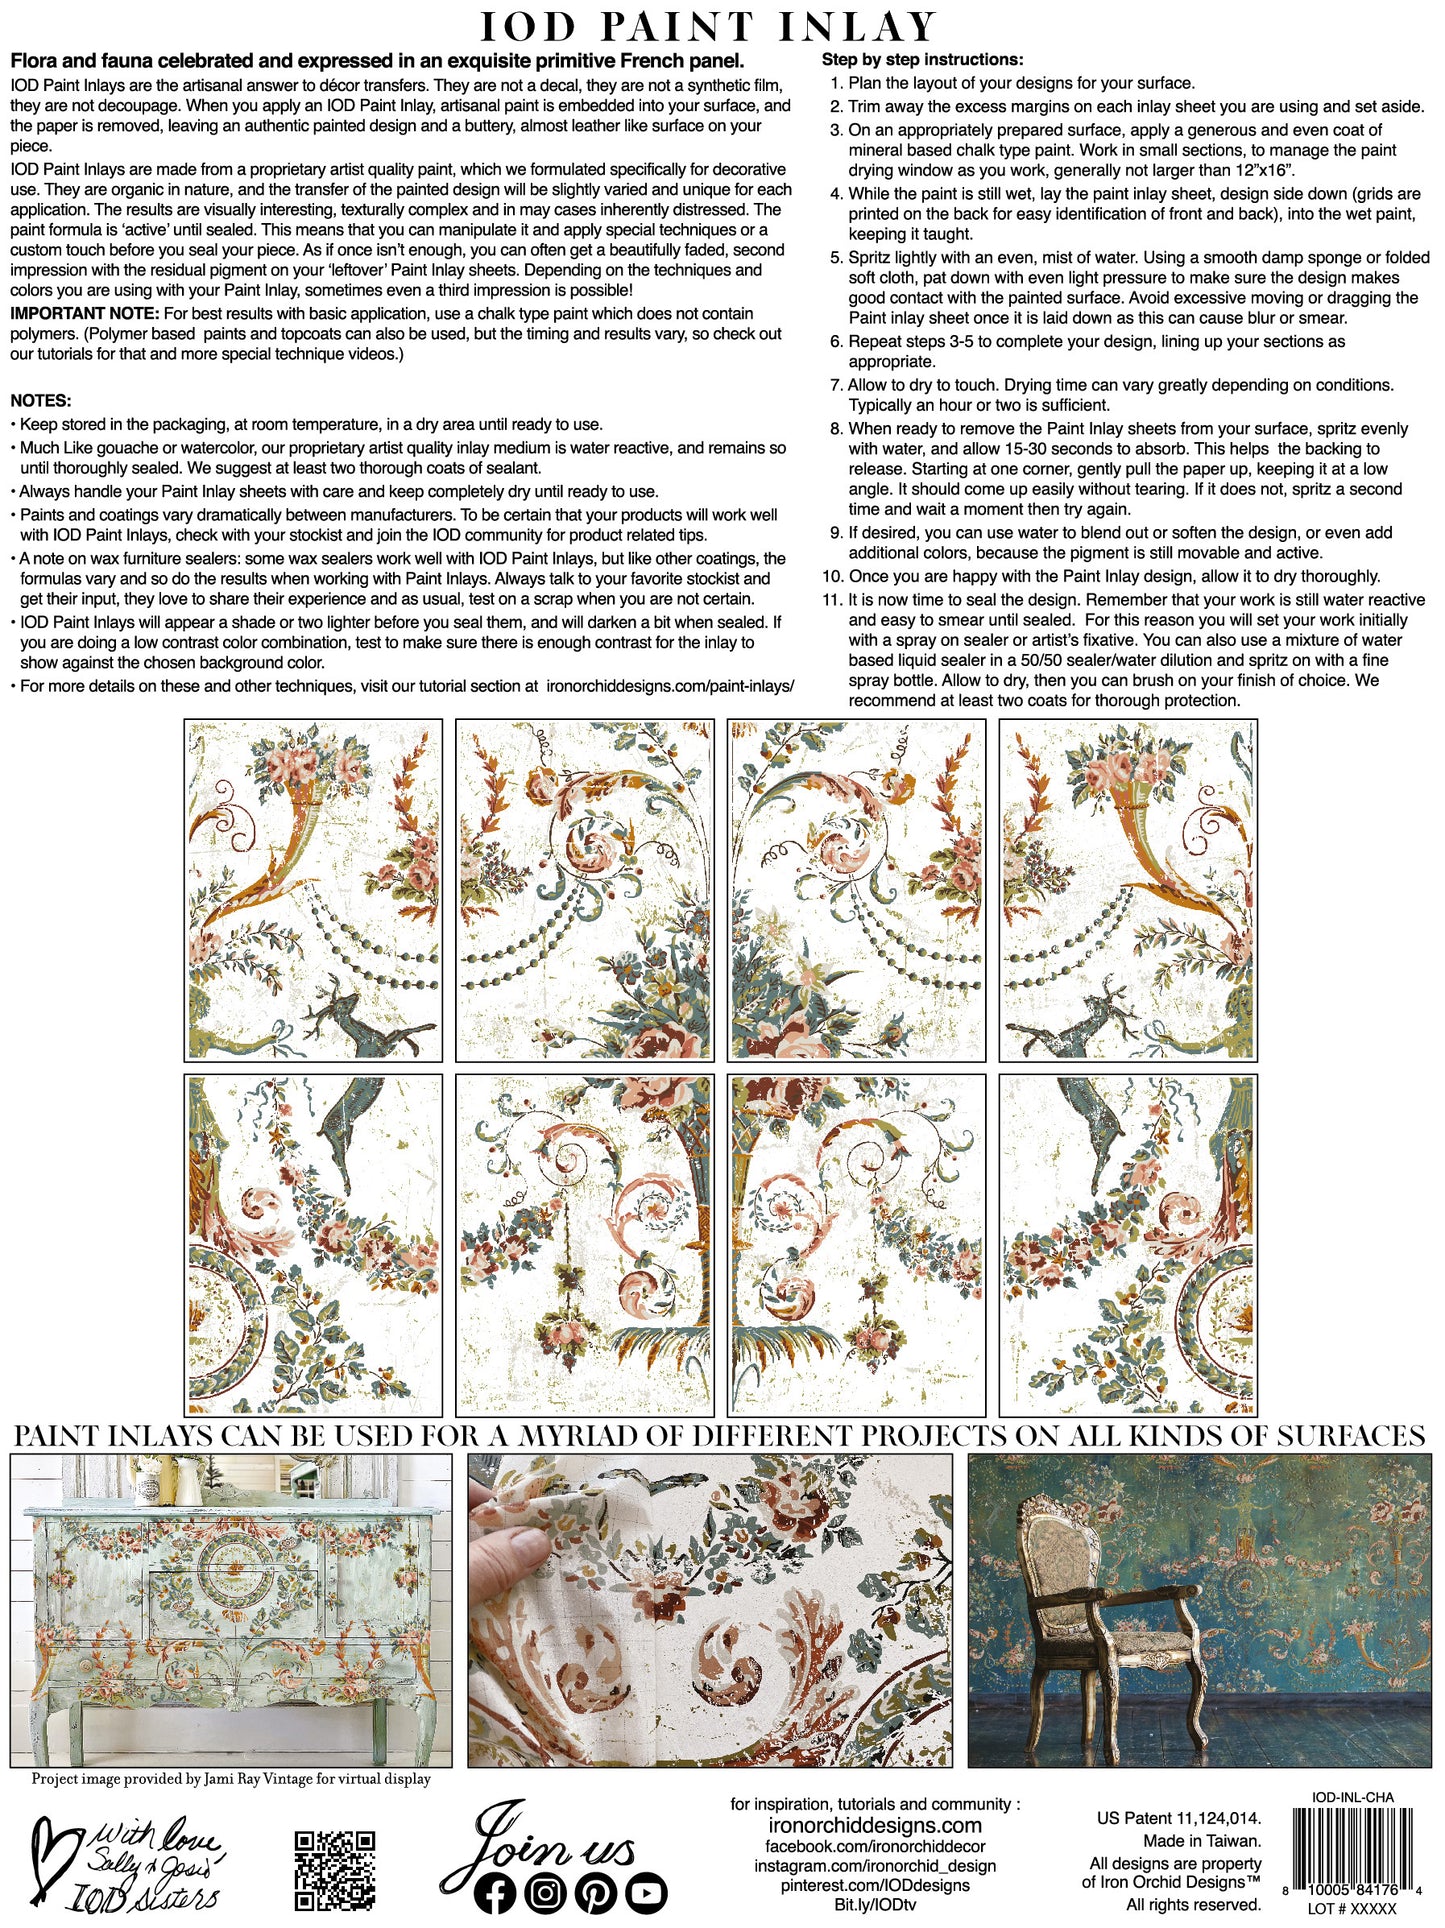 Chateau Paint Inlay- IOD